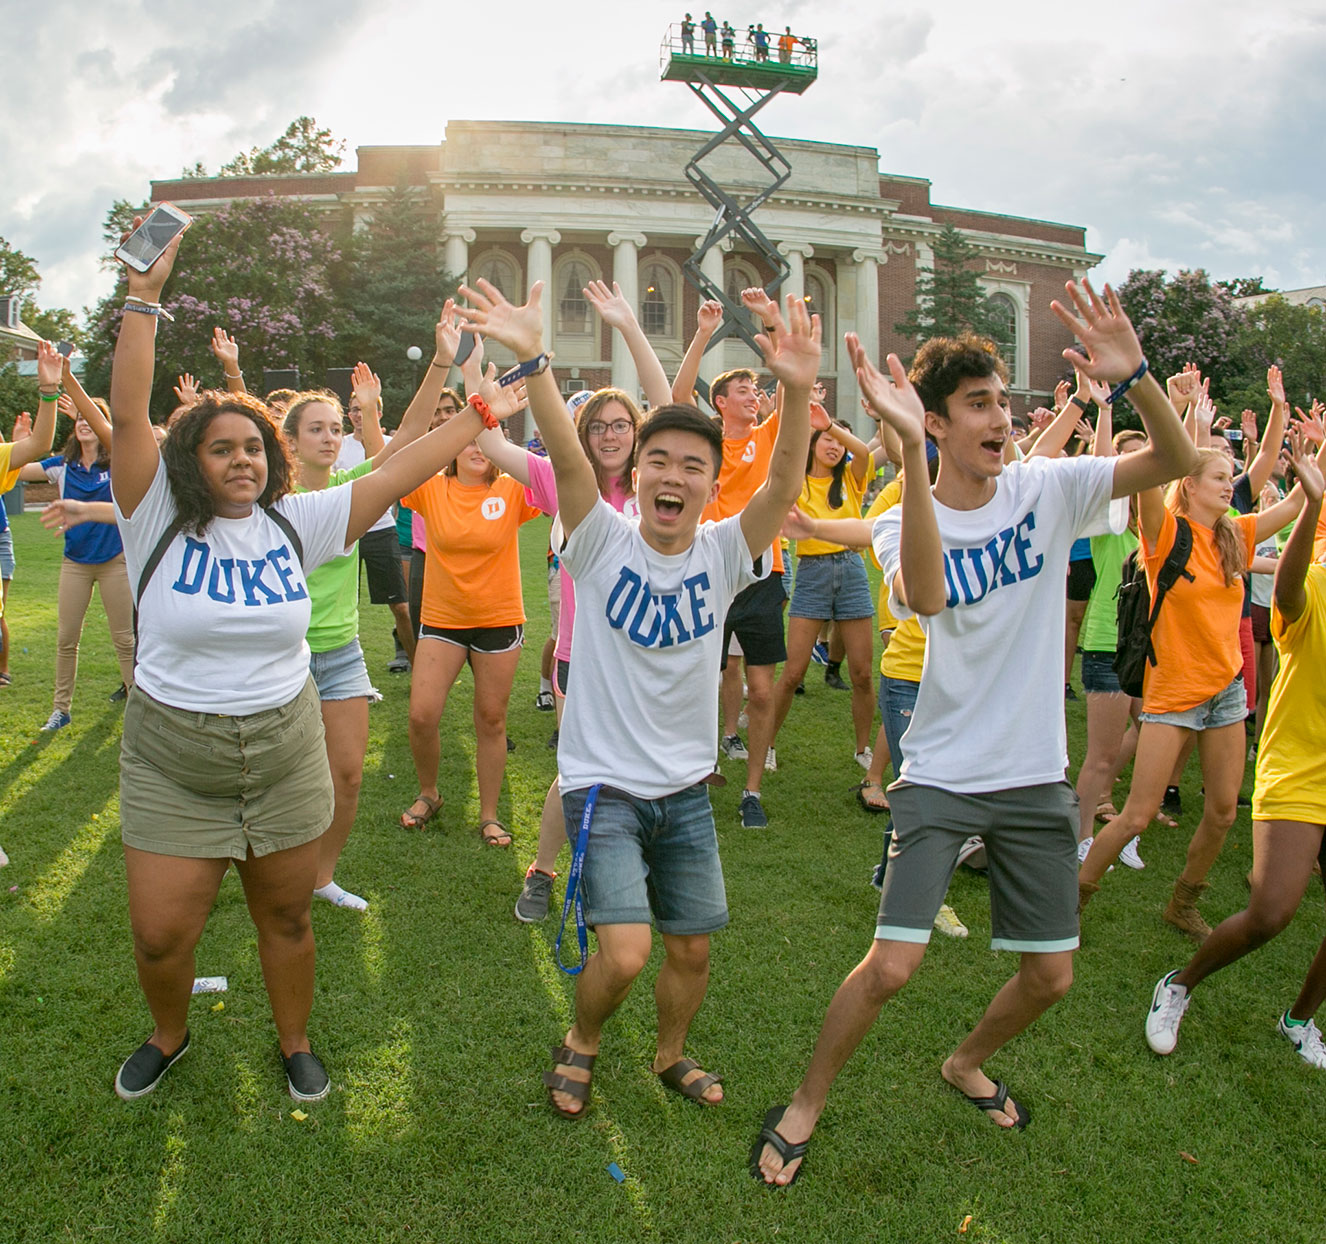 First year students waving their arms in the air with peer advisors